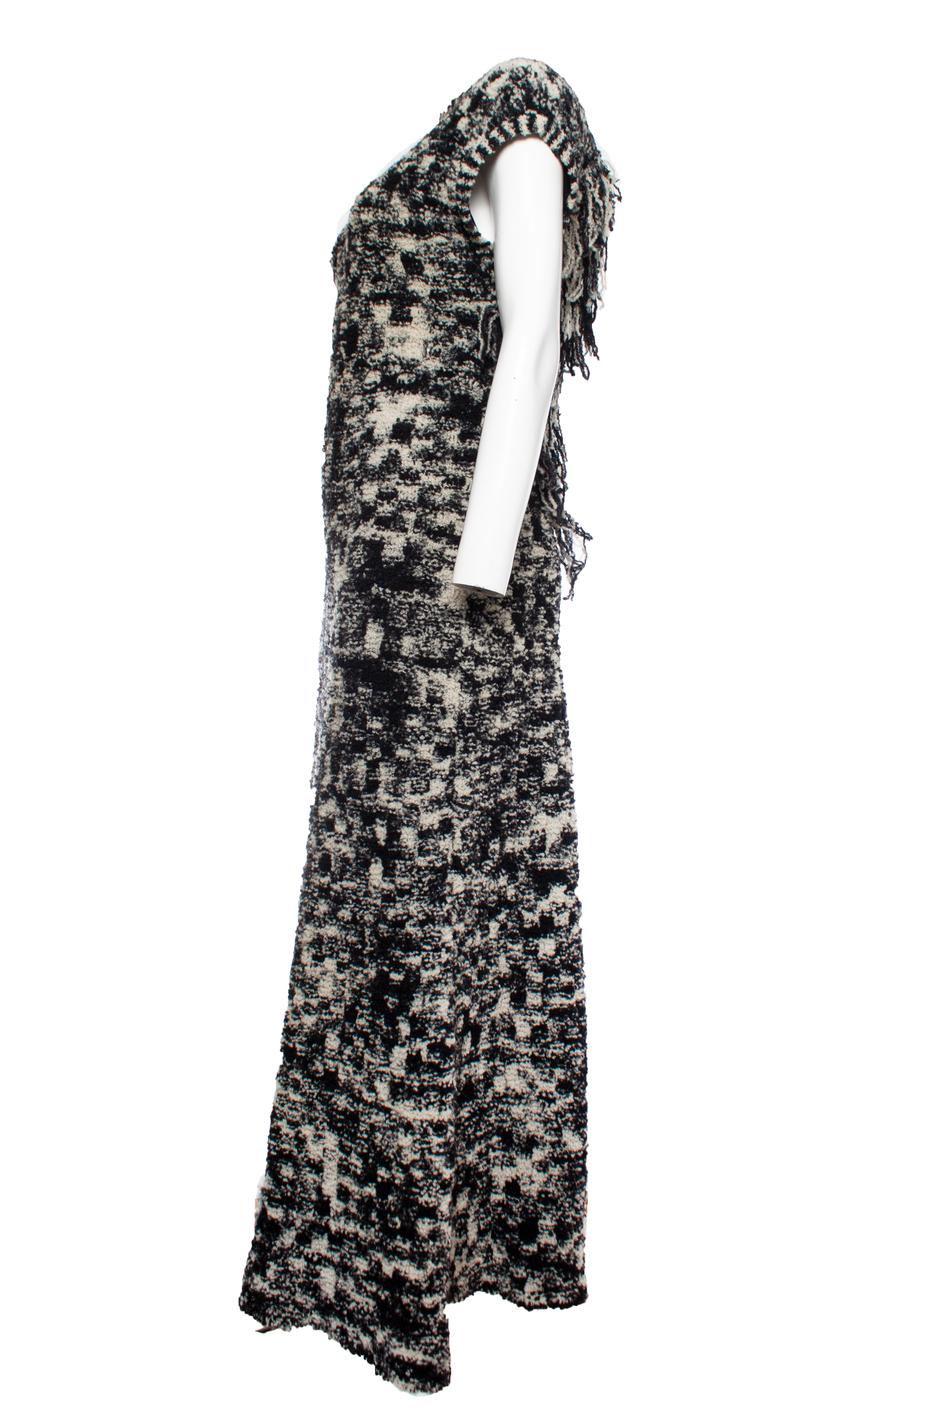 Chanel, Black and white boucle knit maxi gown In Excellent Condition For Sale In AMSTERDAM, NL